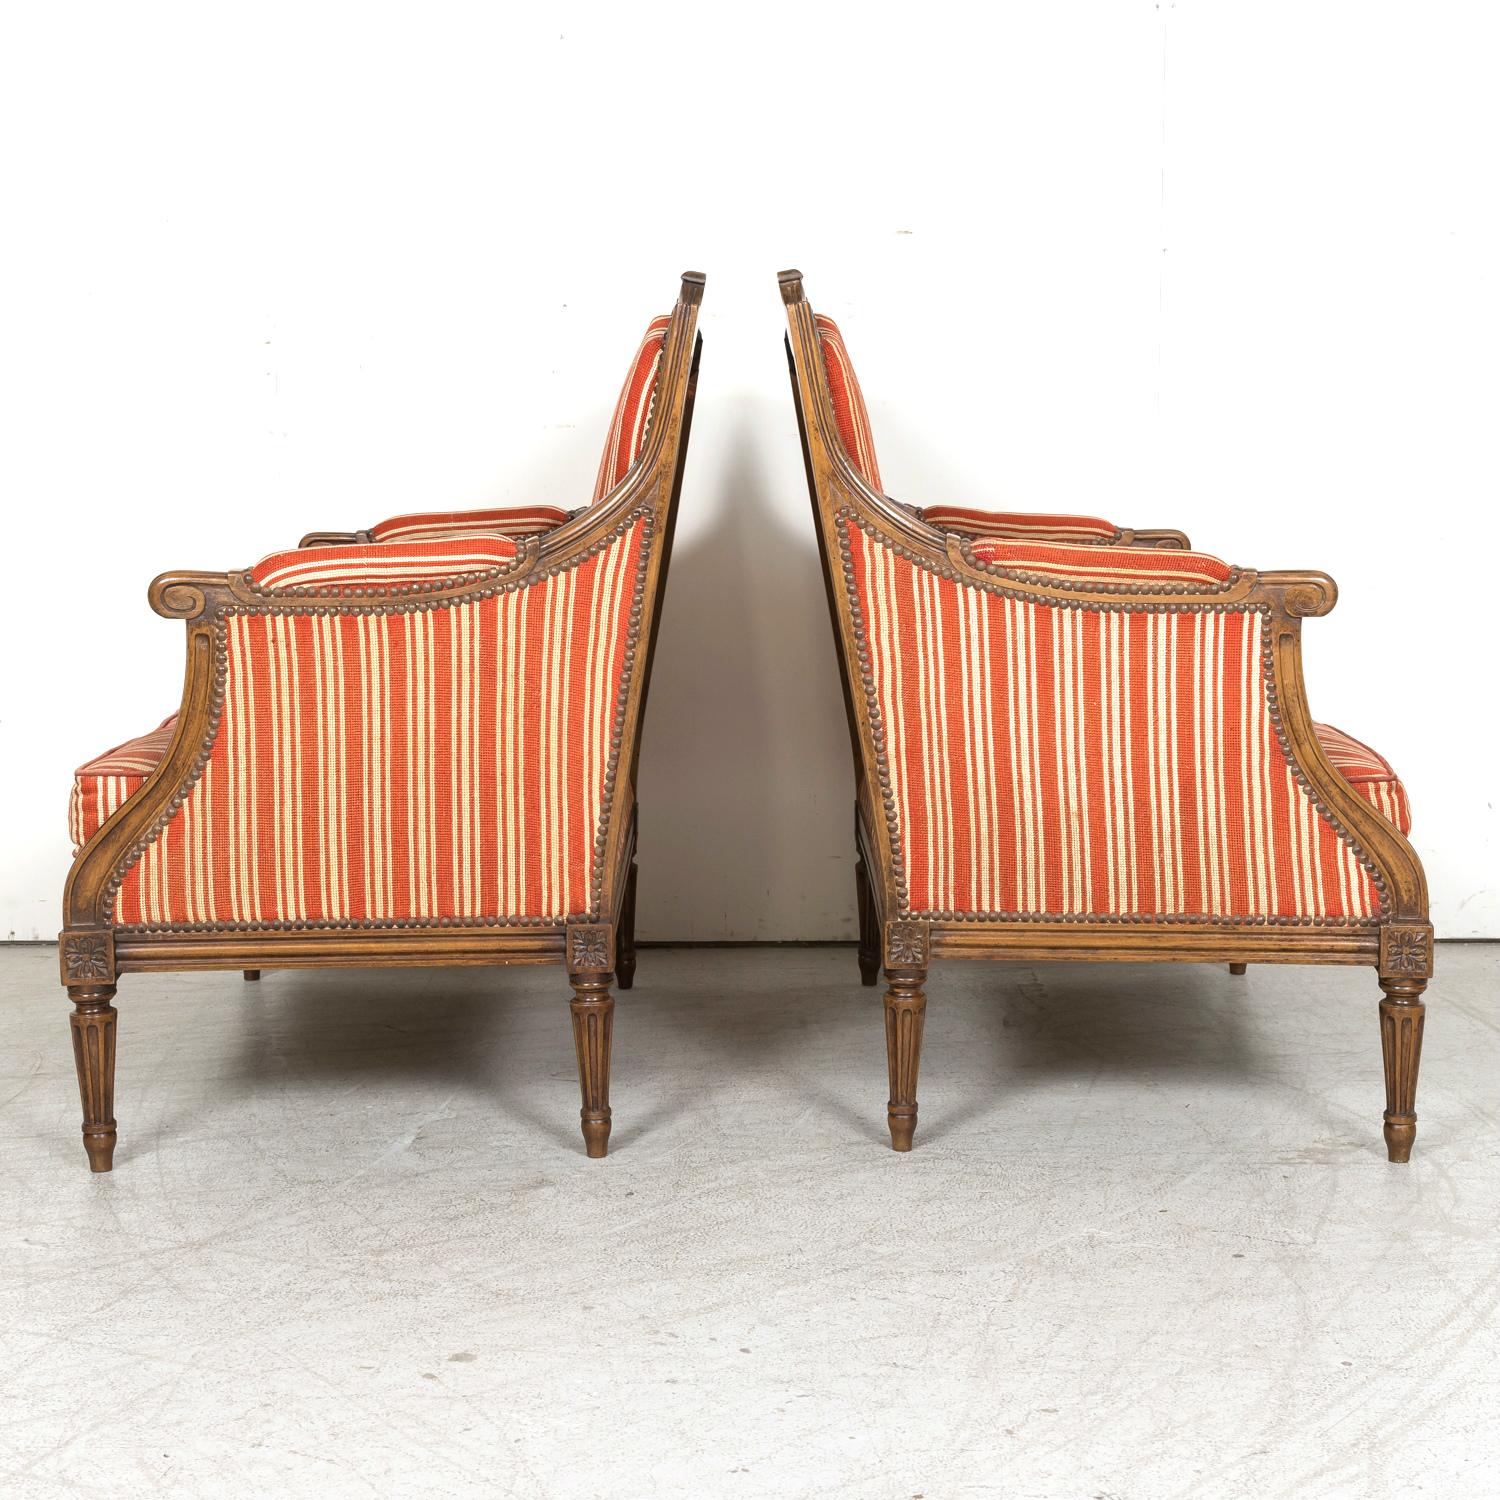 Pair of 19th Century French Louis XVI Style Oversized Bergere Marquise Armchairs For Sale 8